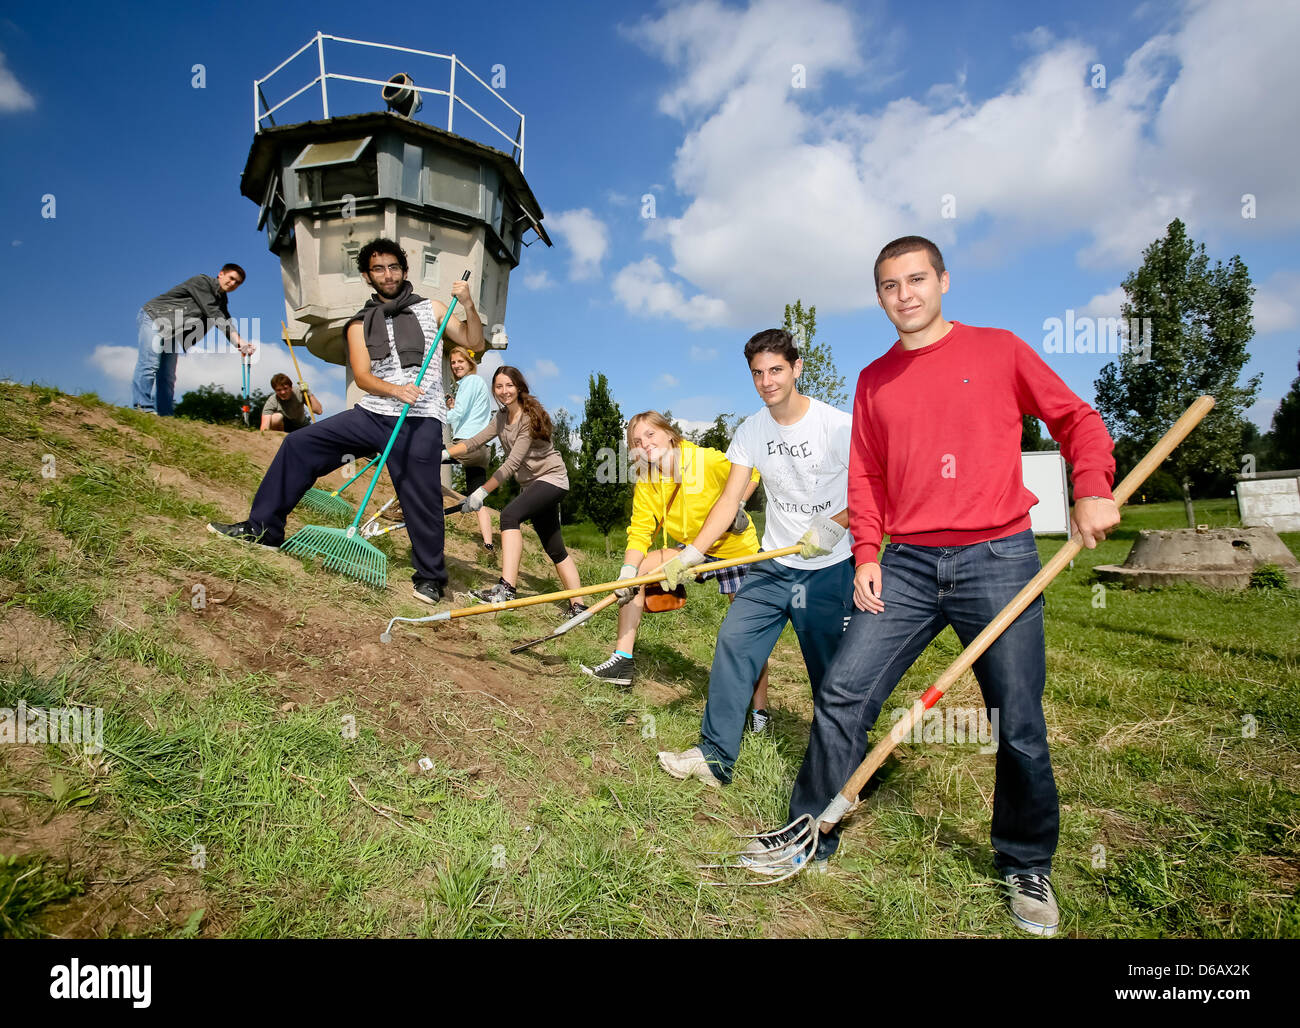 Participants of an international youth work shop garden the area of former GDR border installations near Hoetensleben, Germany, 08 August 2012. The memorial site Hoetensleben fights against being forgotten. Therefore, juveniles from across the world help maintain the site every year. Photo: ANDREAS LANDER Stock Photo